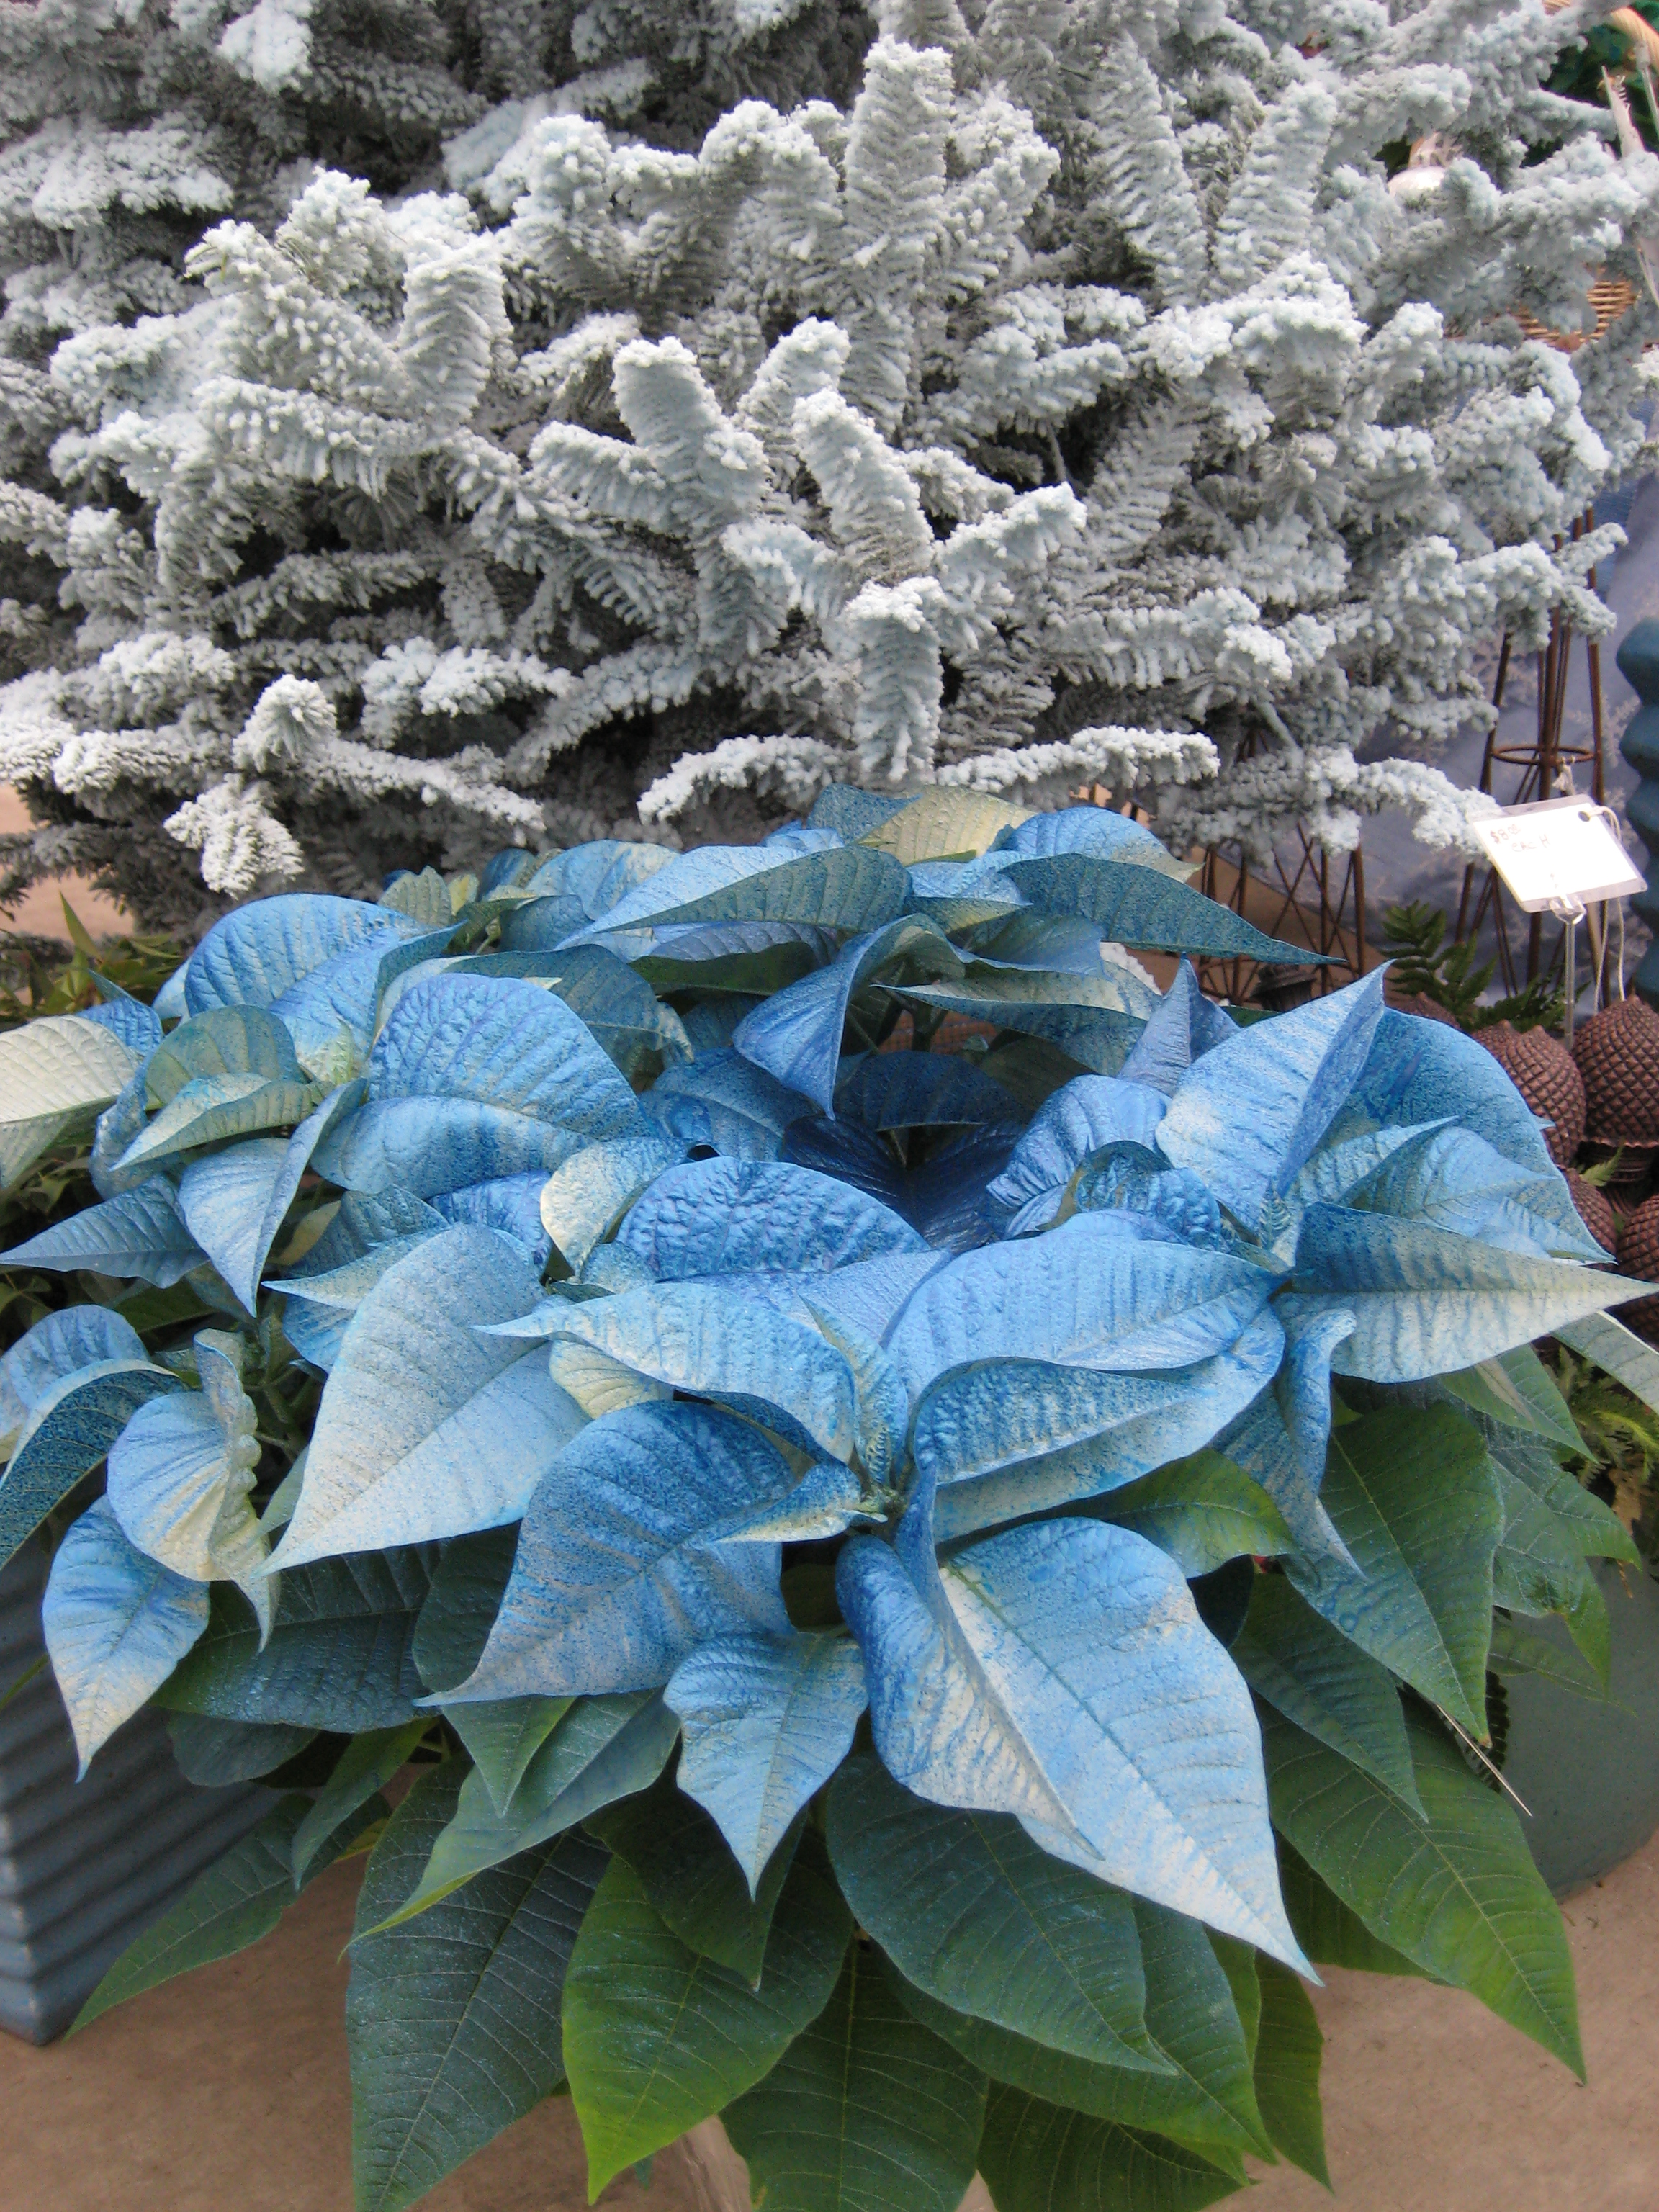 Picture of Blue Moon Poinsettias and Flocked Evergreen Branches